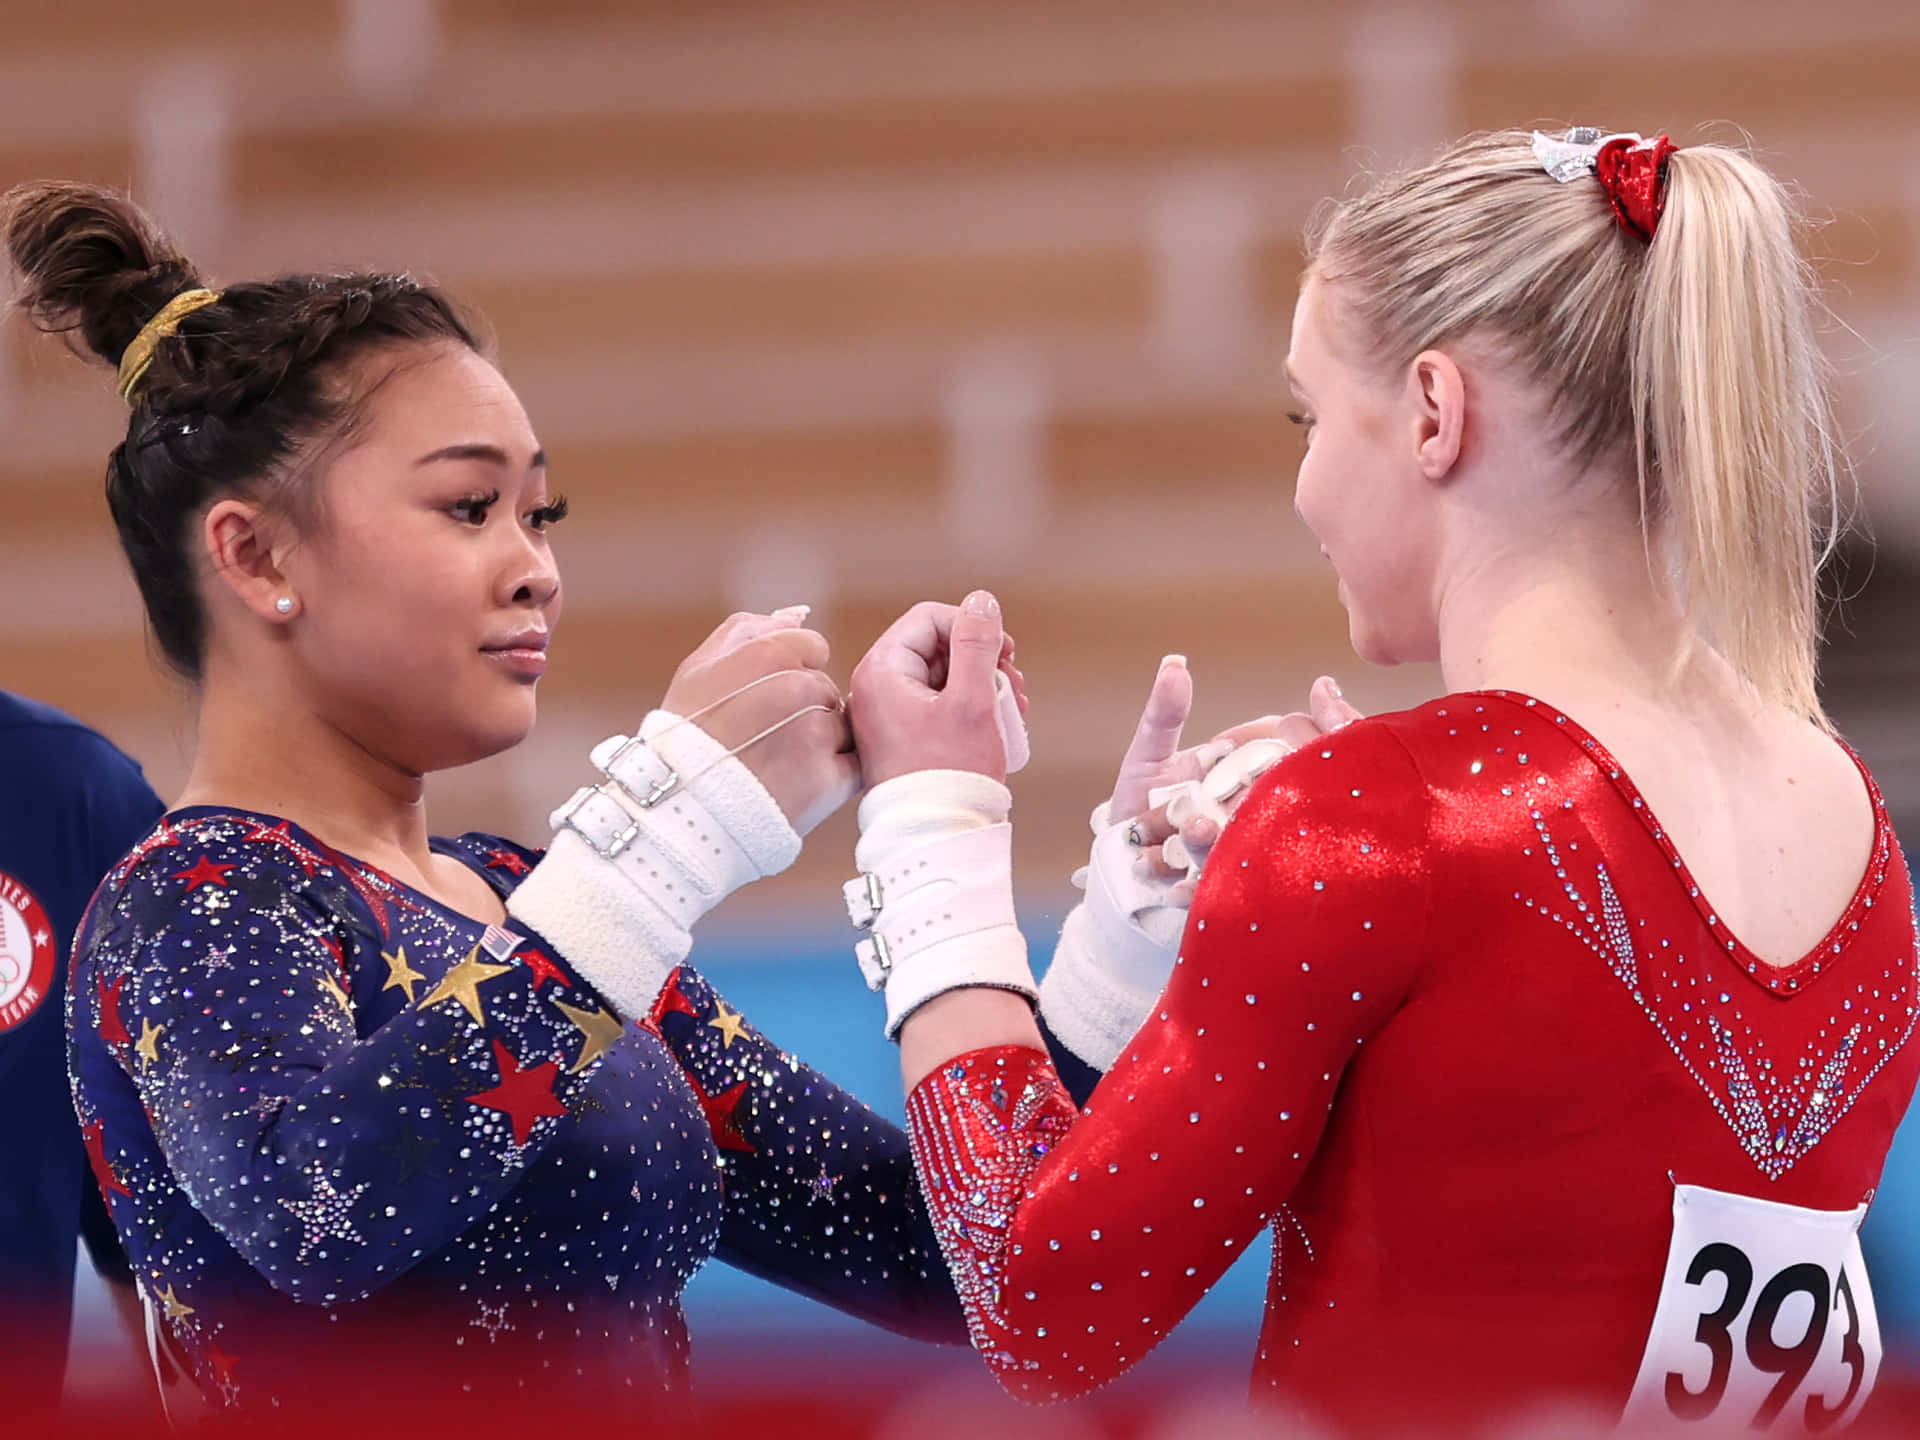 Two Women Are Shaking Hands While Performing Gymnastics